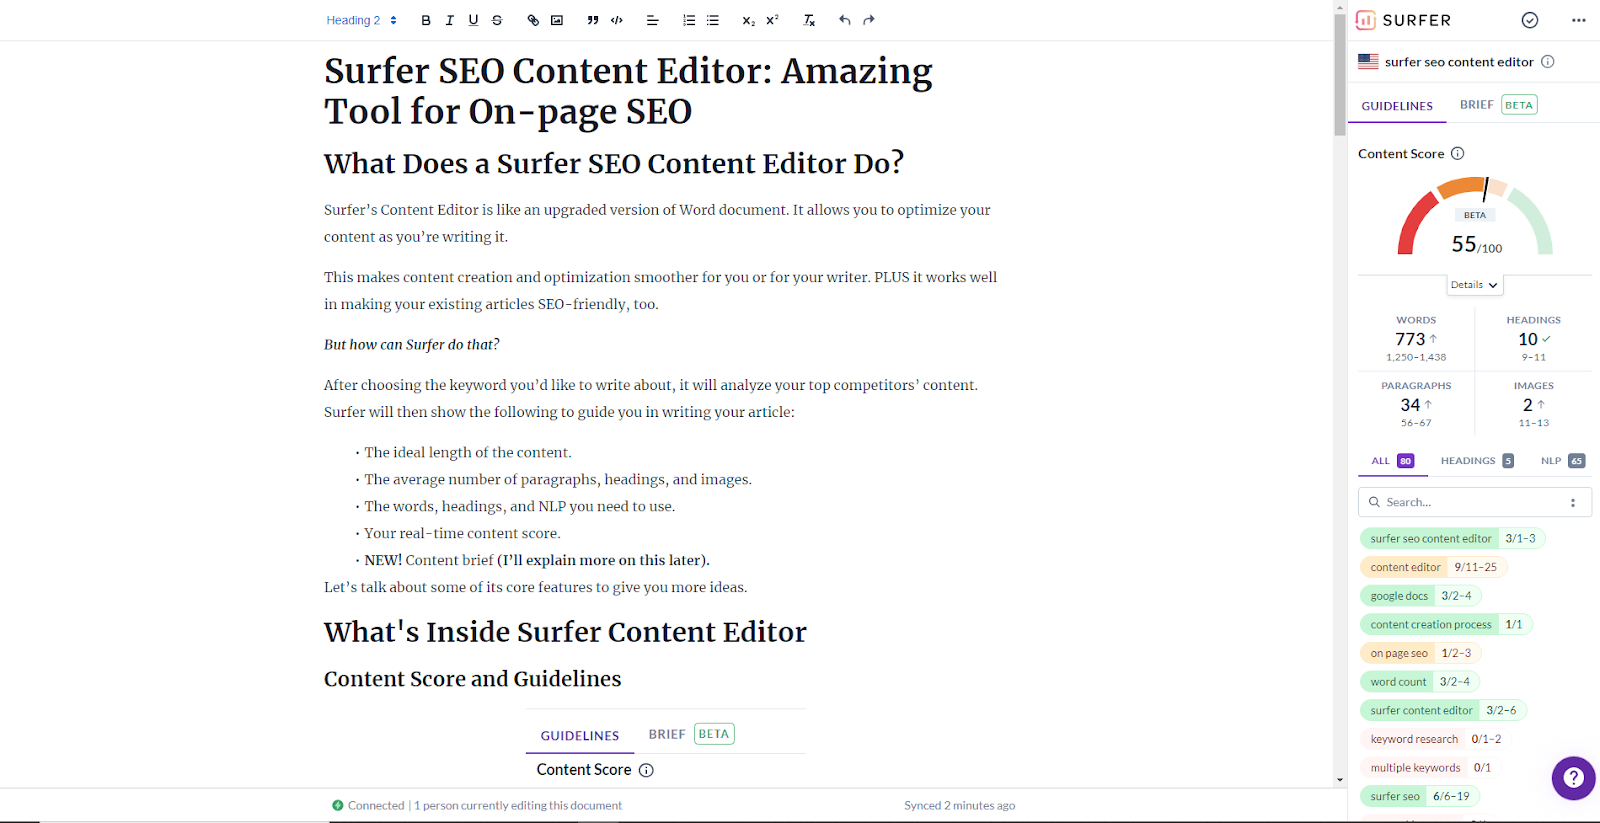 Surfer SEO Content Editor: Amazing Tool for On-page SEO 10